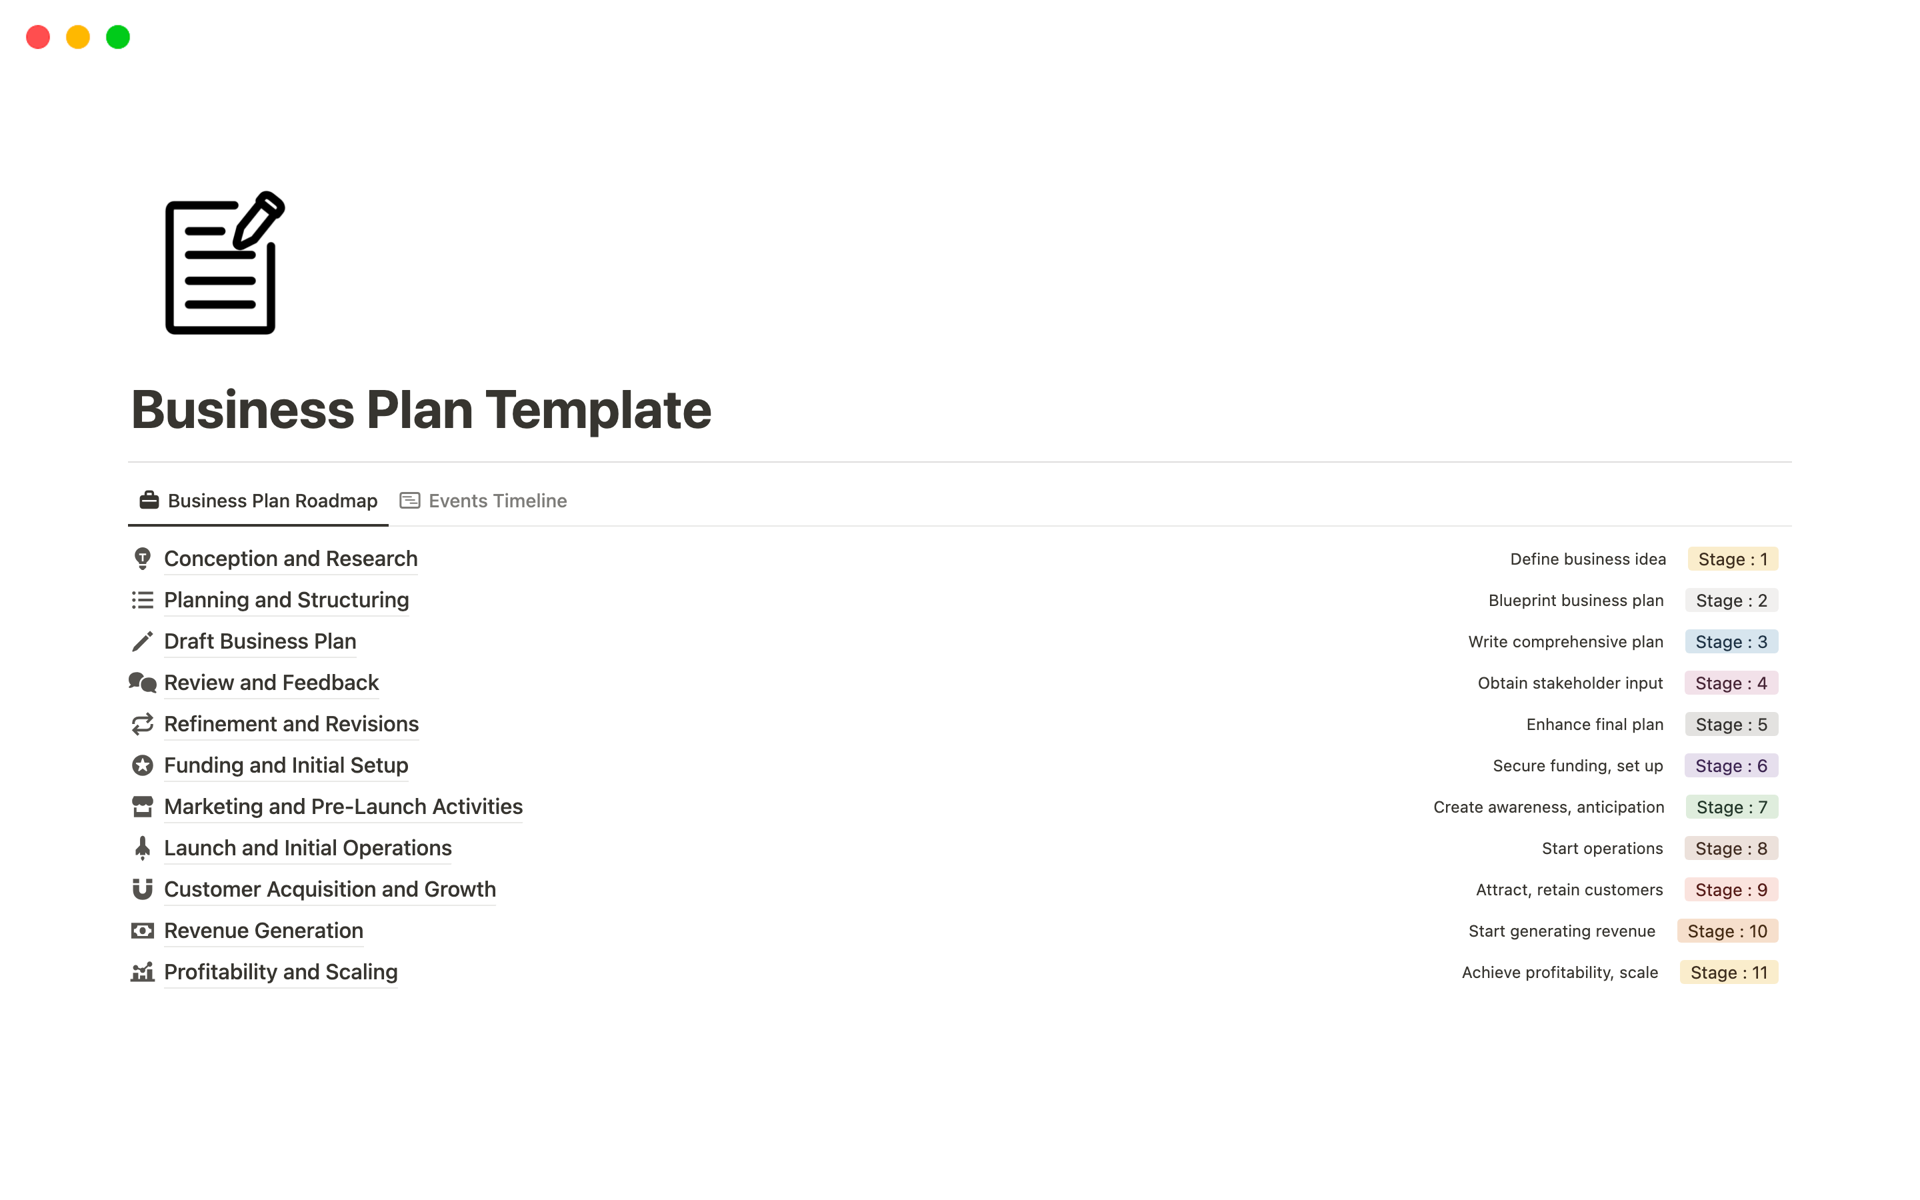 This is a user-friendly business planner template that helps outline a company's goals, strategies, and anticipated outcomes, serving as a roadmap for success and a guide for potential investors.